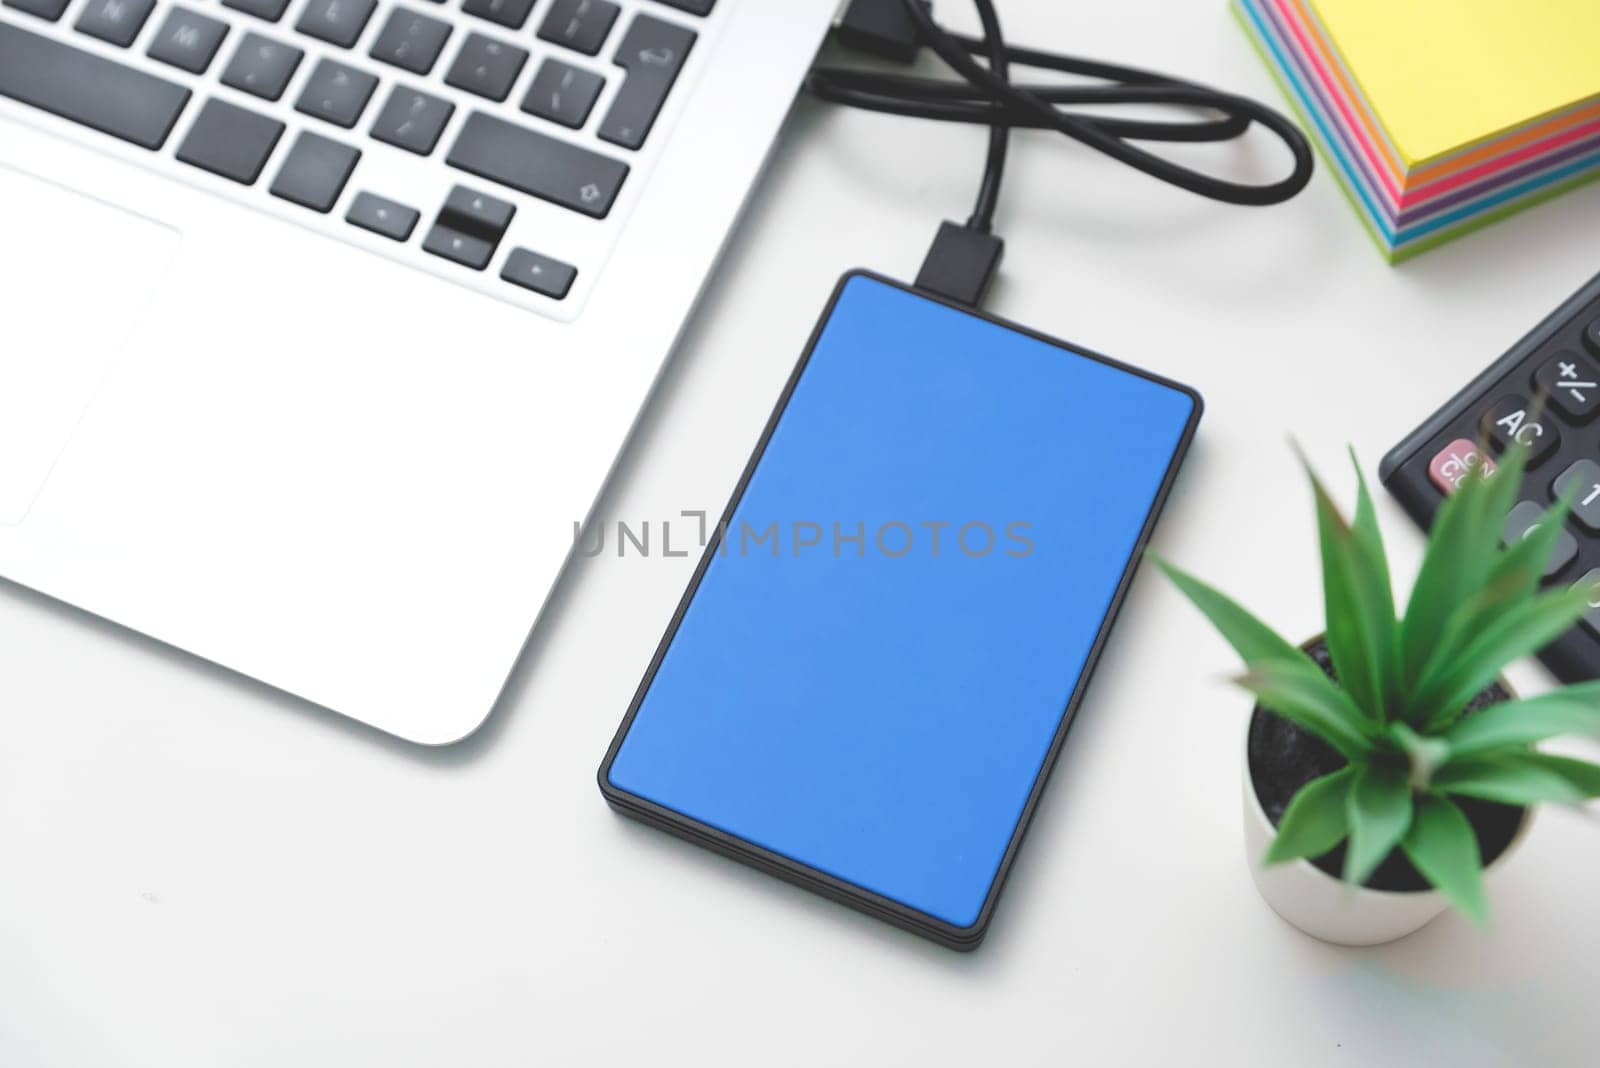 External backup disk, USB hard drive connected to laptop.